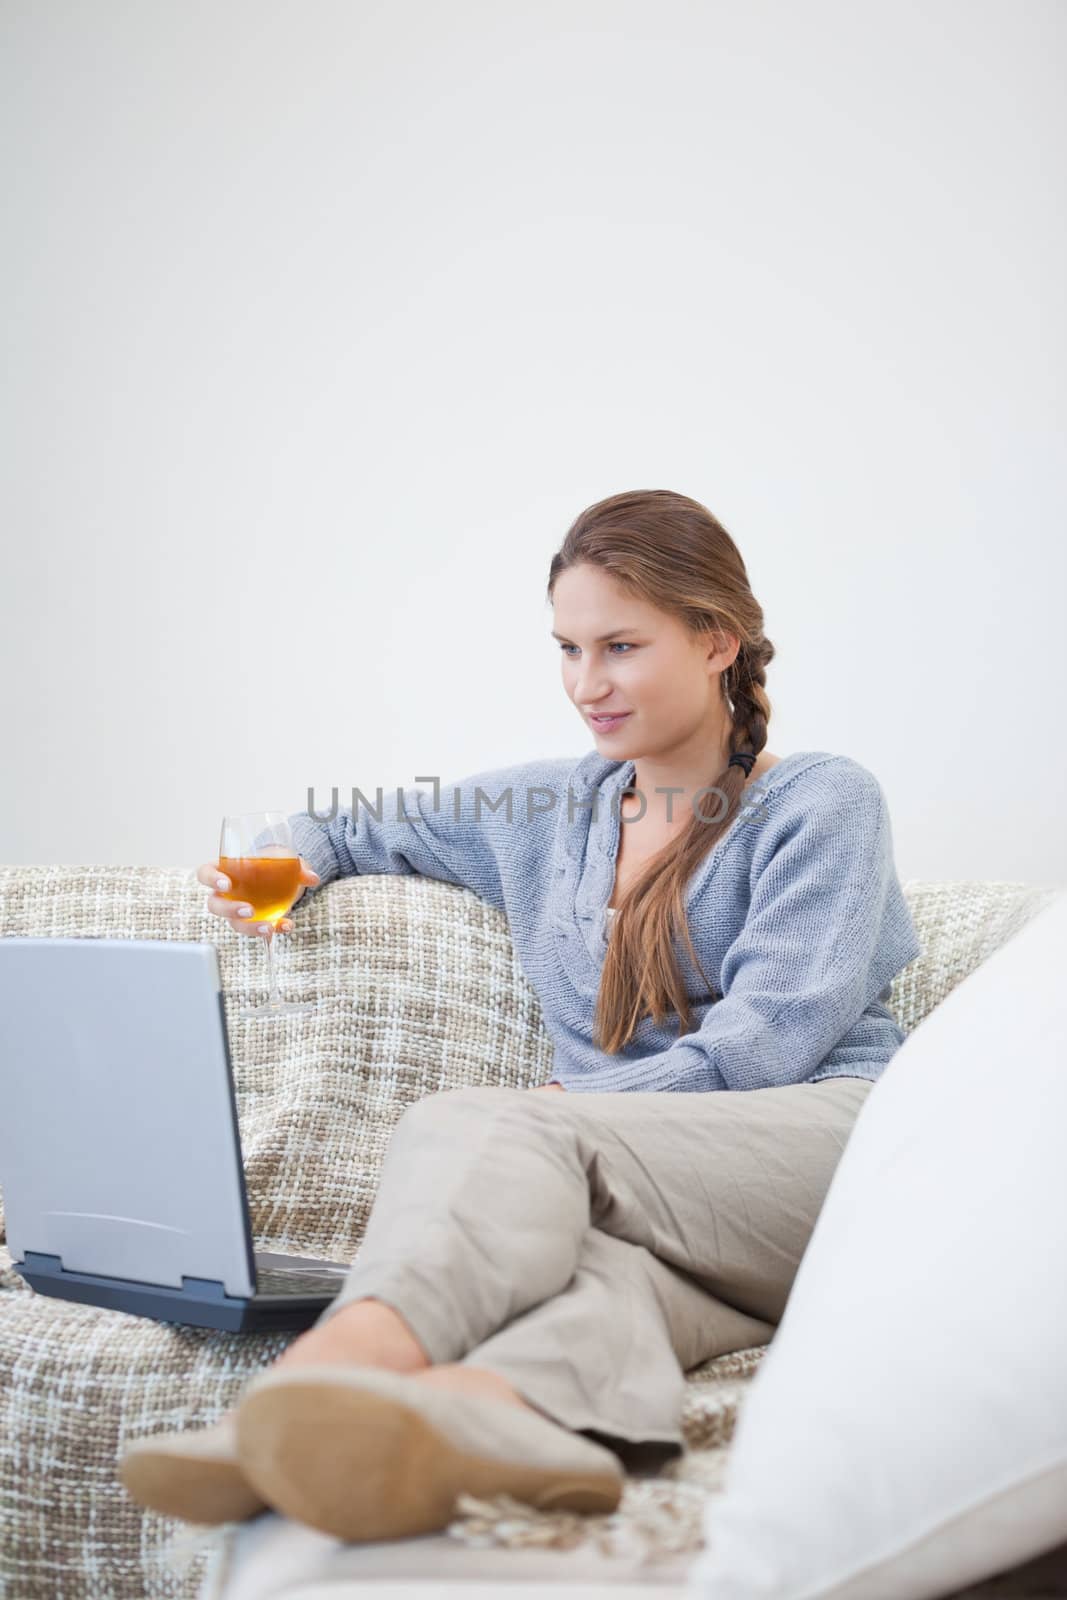 Woman sitting and holding a glass while looking on a laptop by Wavebreakmedia